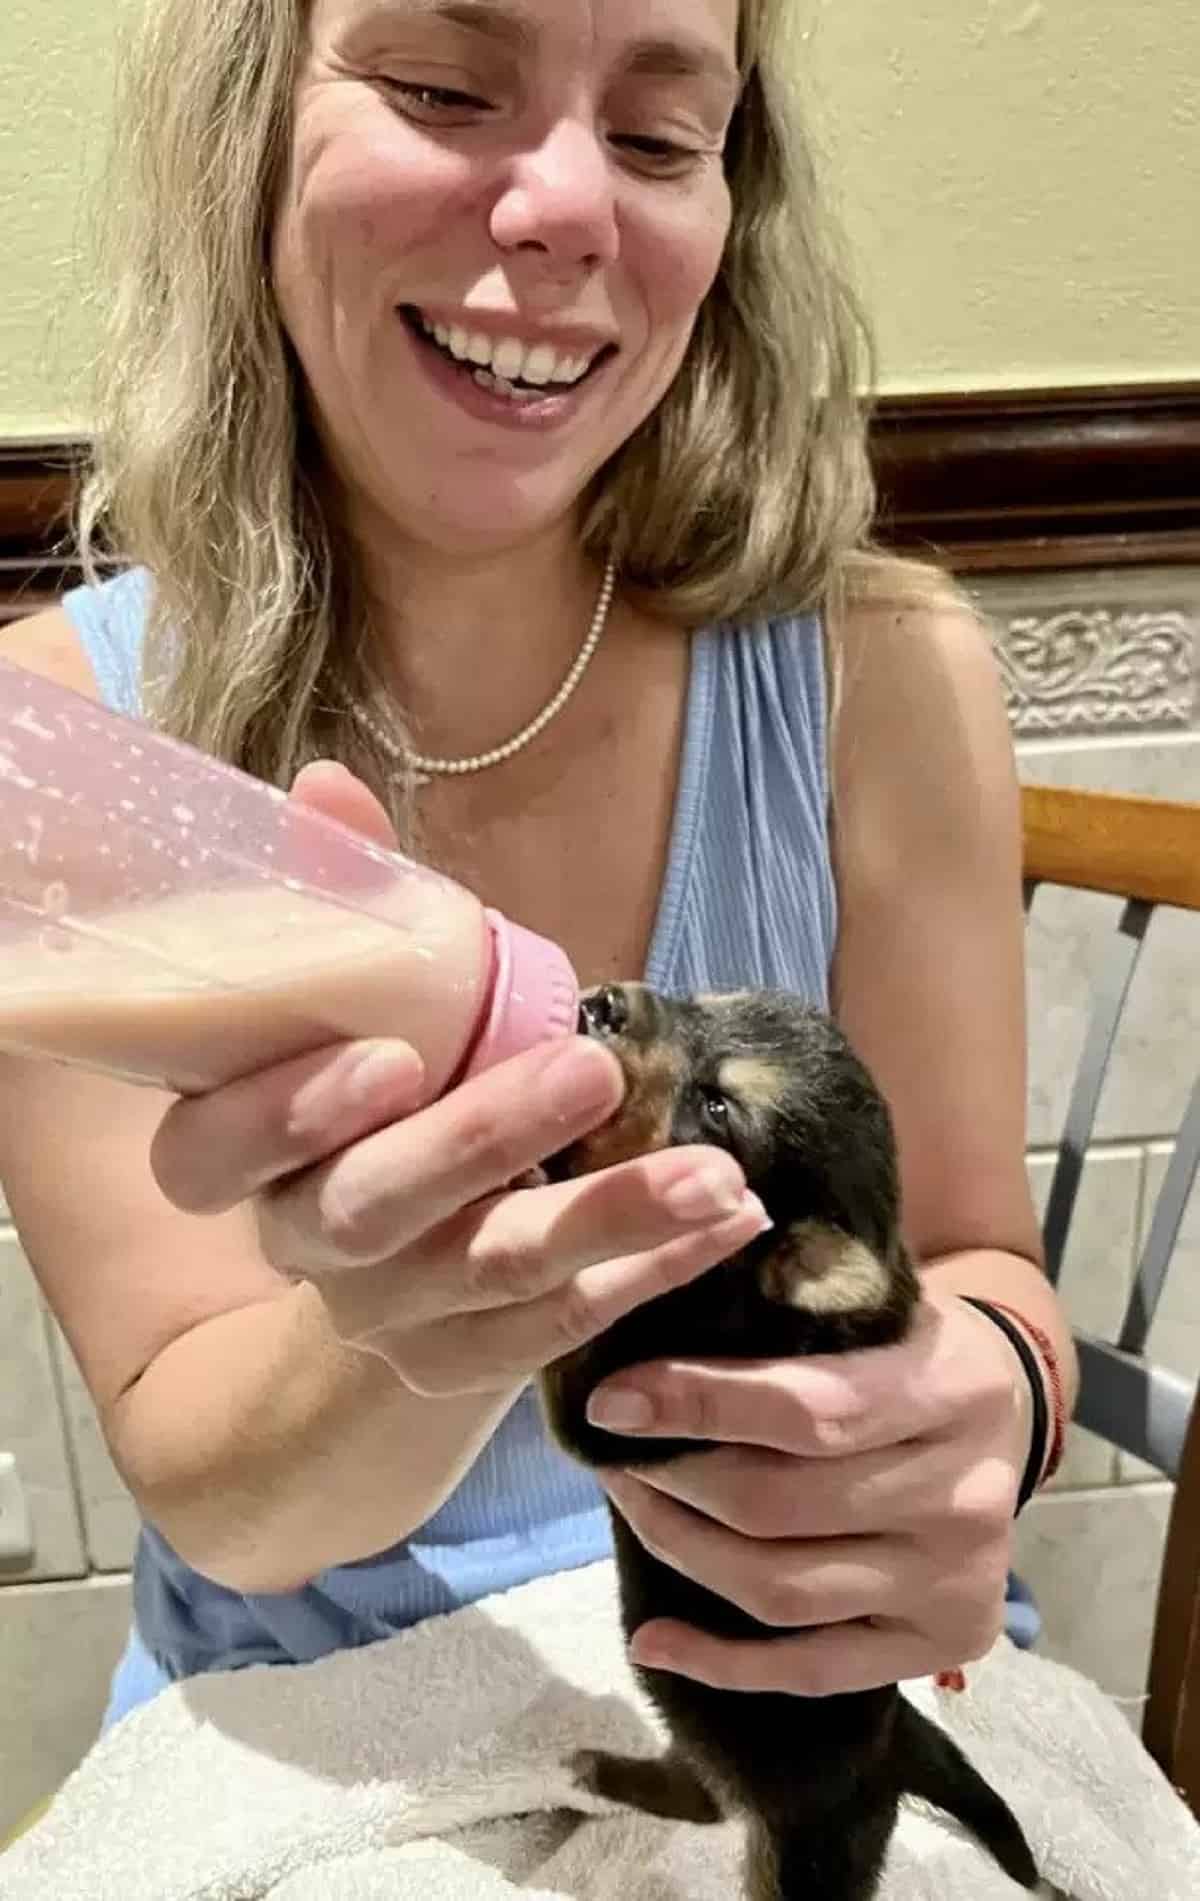 smiling woman feeding a puppy from a bottle